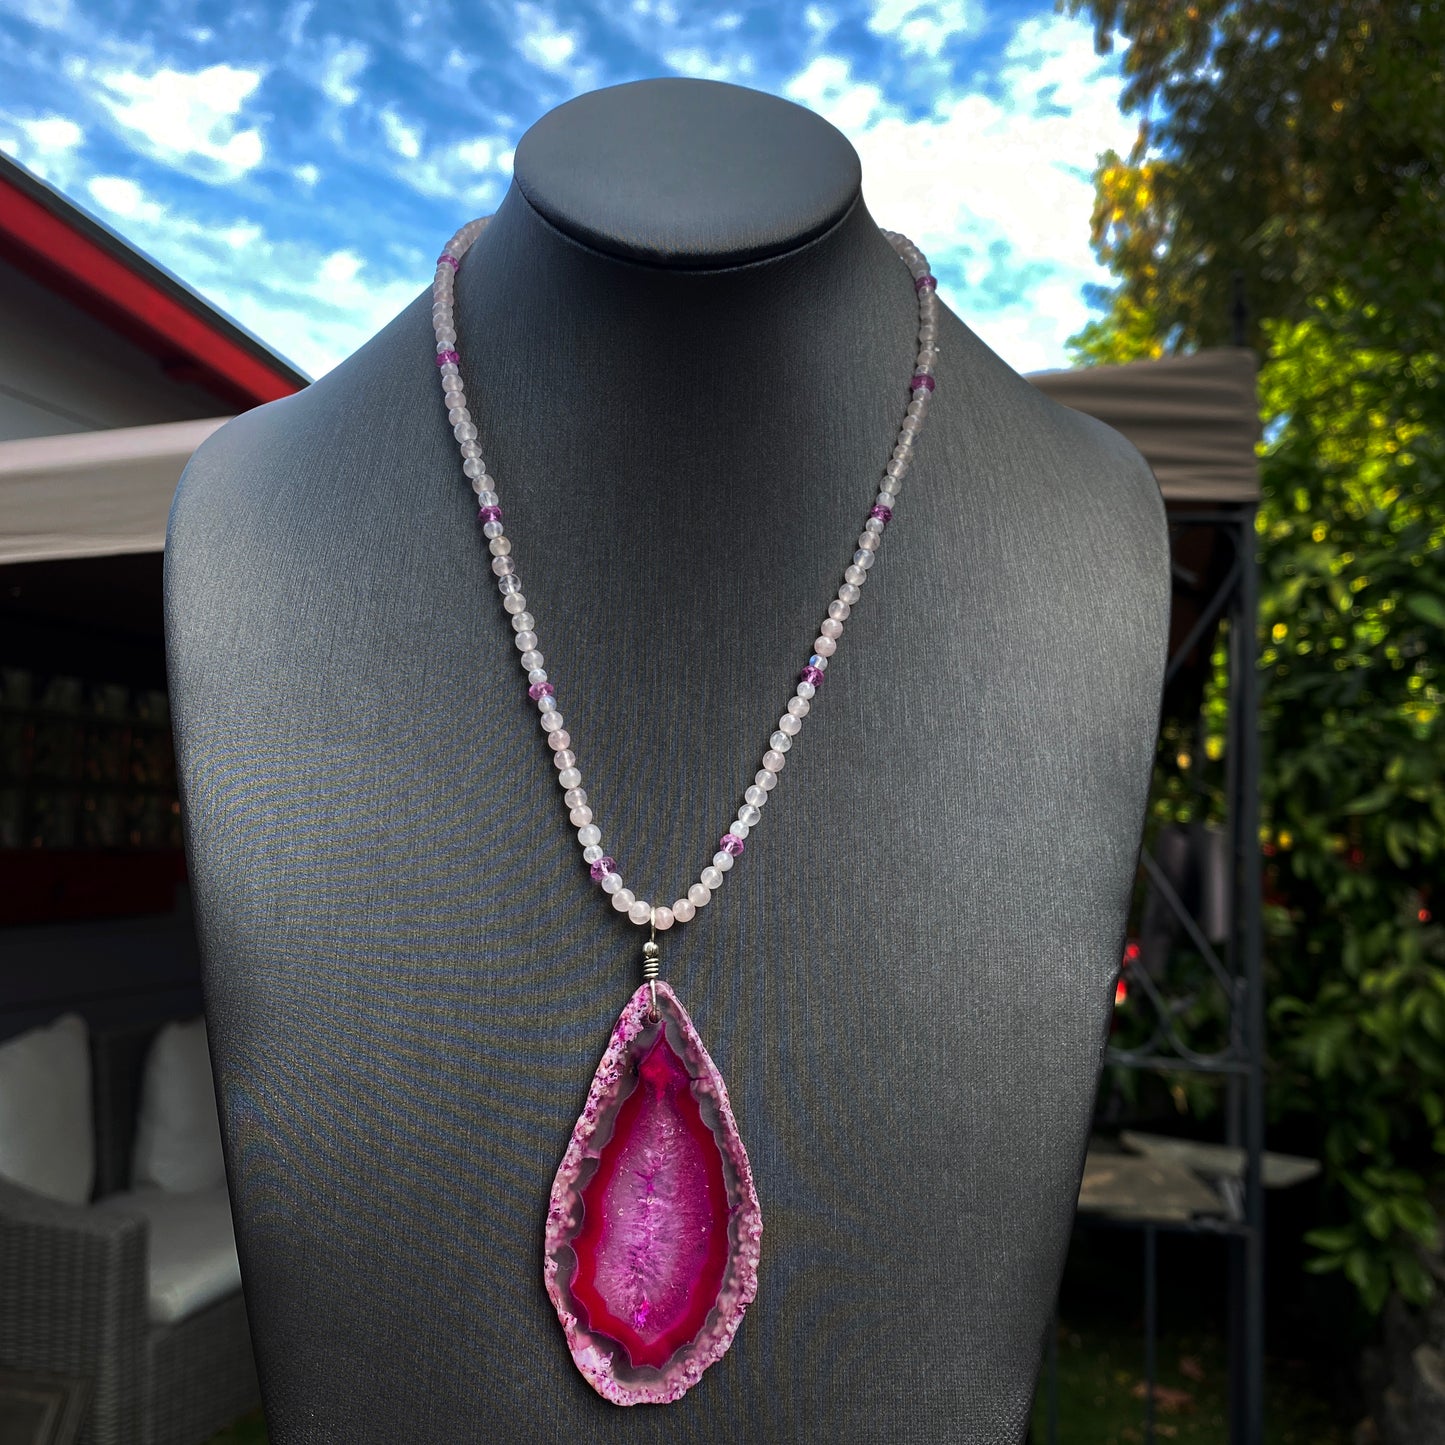 Women's Rose-Red Onyx Gemstone with Druzy Geode Agate pendant necklace